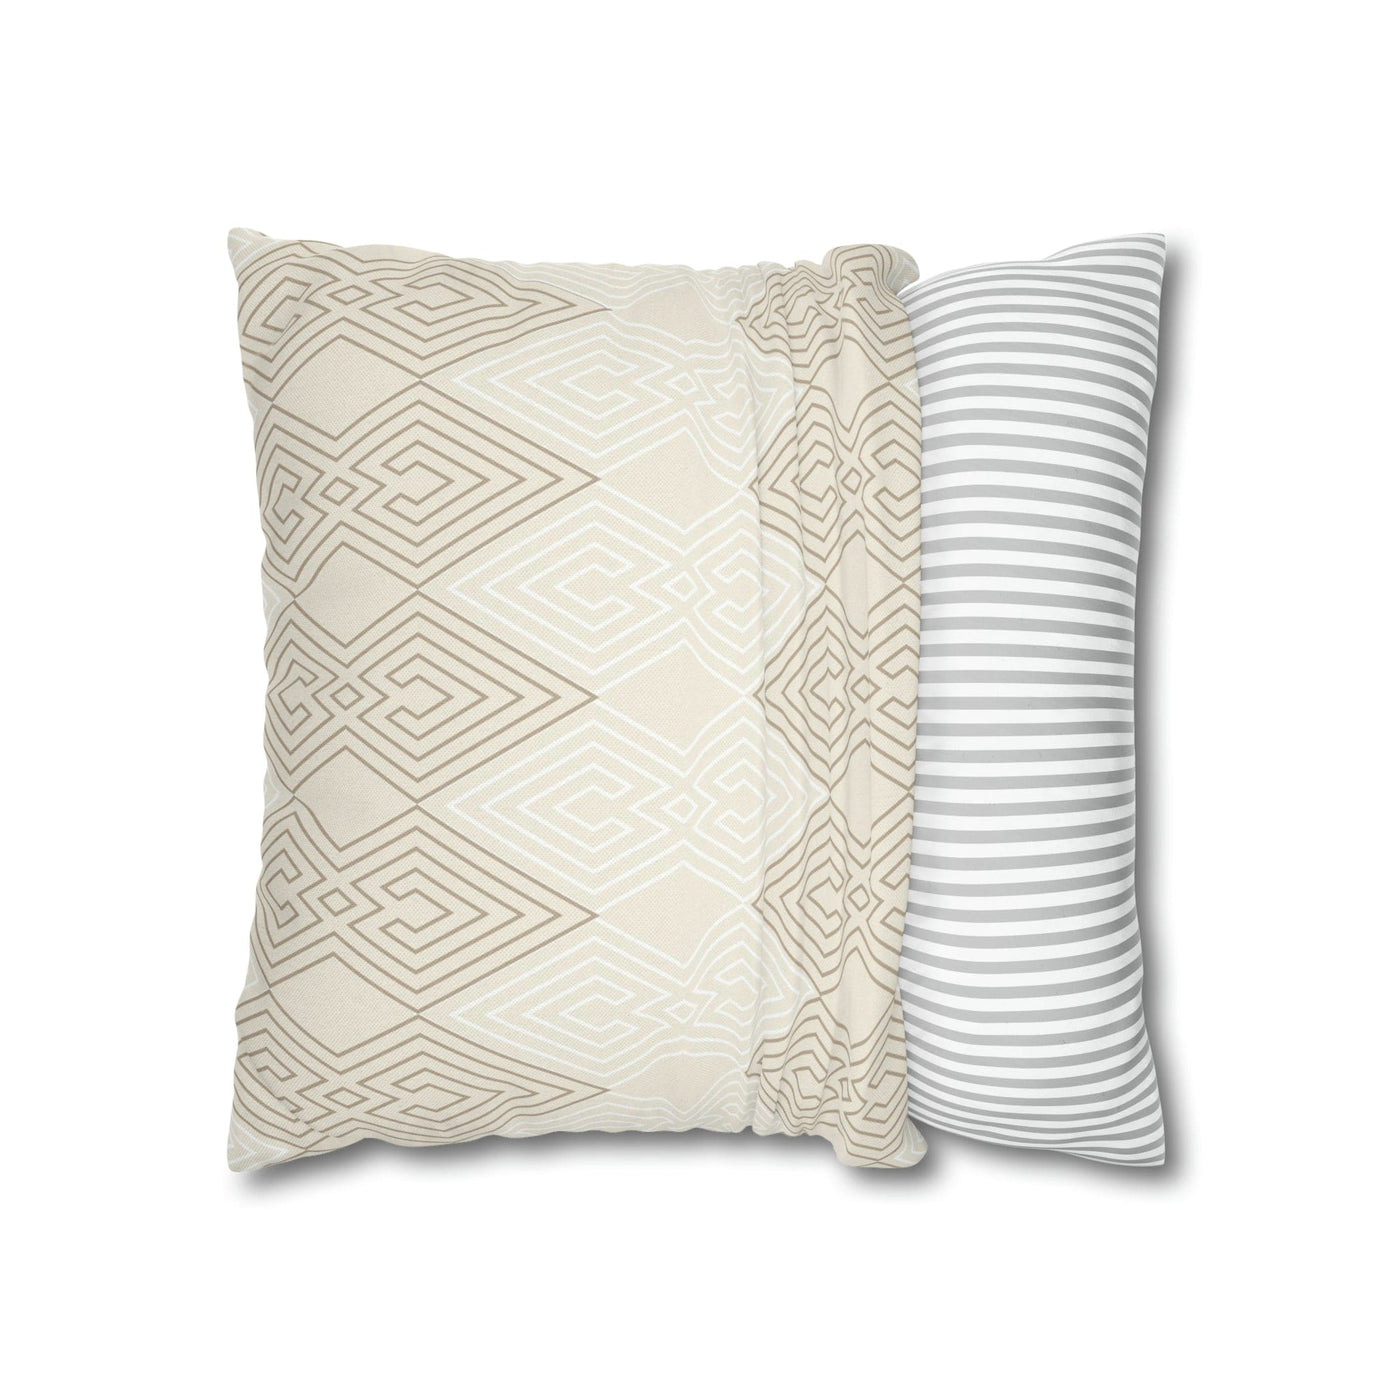 Decorative Throw Pillow Covers With Zipper - Set Of 2 Beige And White Tribal